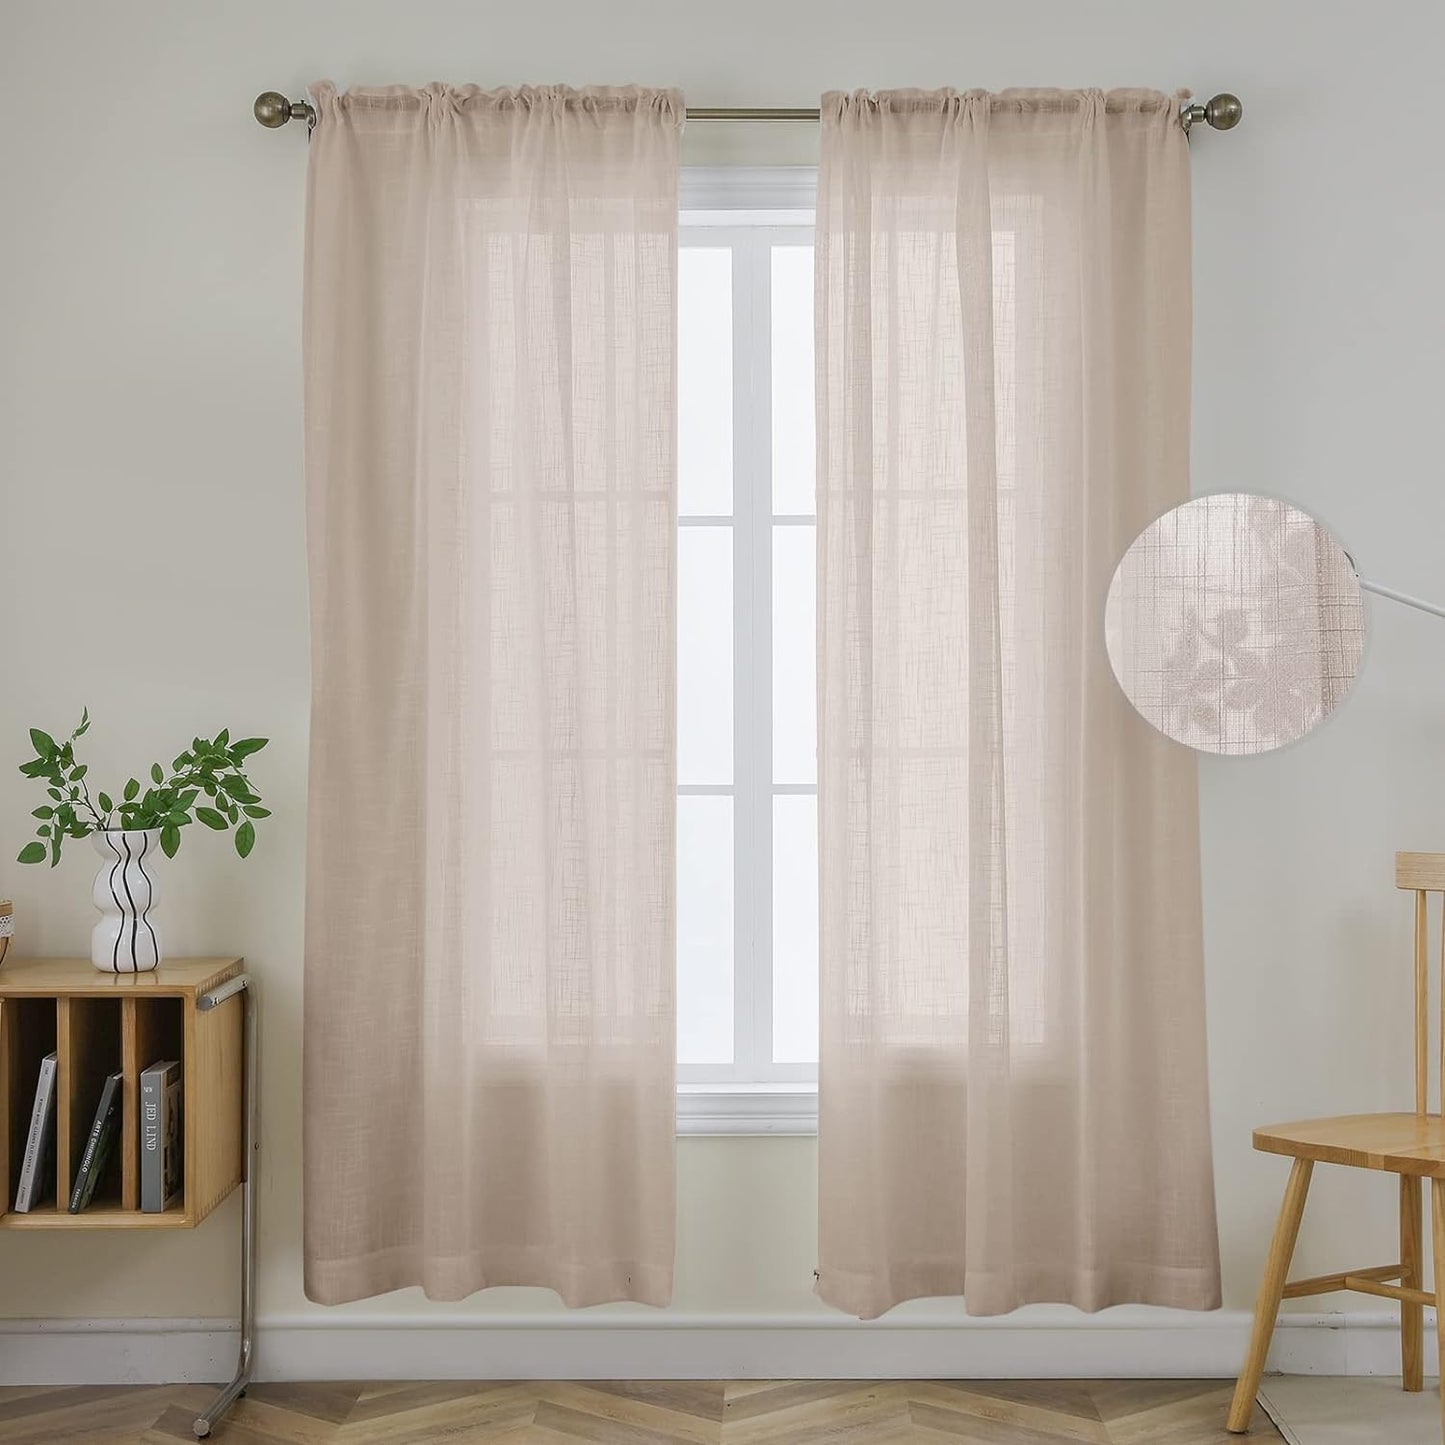 Joydeco White Sheer Curtains 63 Inch Length 2 Panels Set, Rod Pocket Long Sheer Curtains for Window Bedroom Living Room, Lightweight Semi Drape Panels for Yard Patio (54X63 Inch, off White)  Joydeco Floral Embroidery-Linen 54W X 72L Inch X 2 Panels 